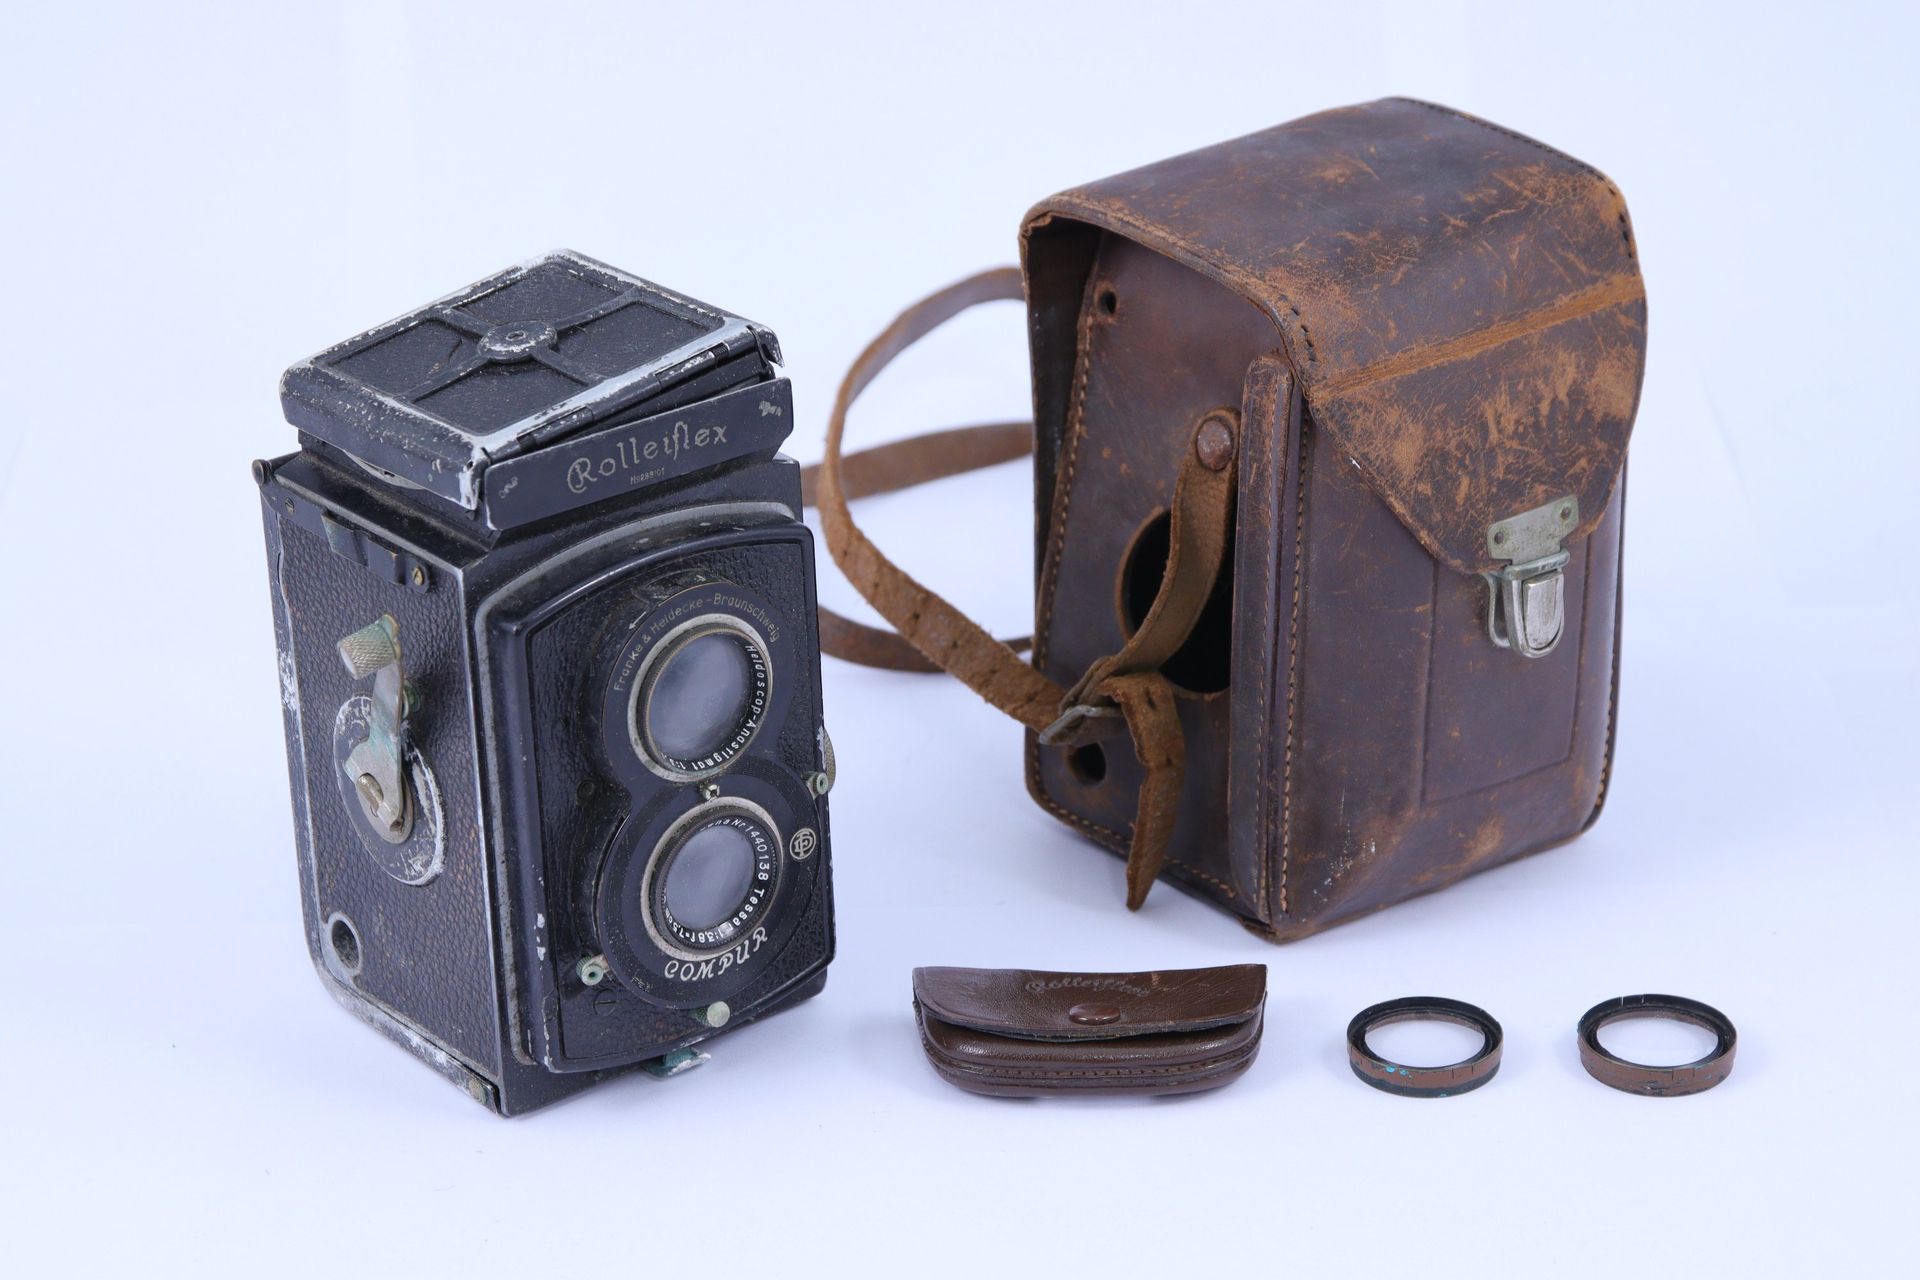 Null APPARATE
Herkunft: collection familiale Roger

1. Rolleiflex - Franke & Hei&hellip;